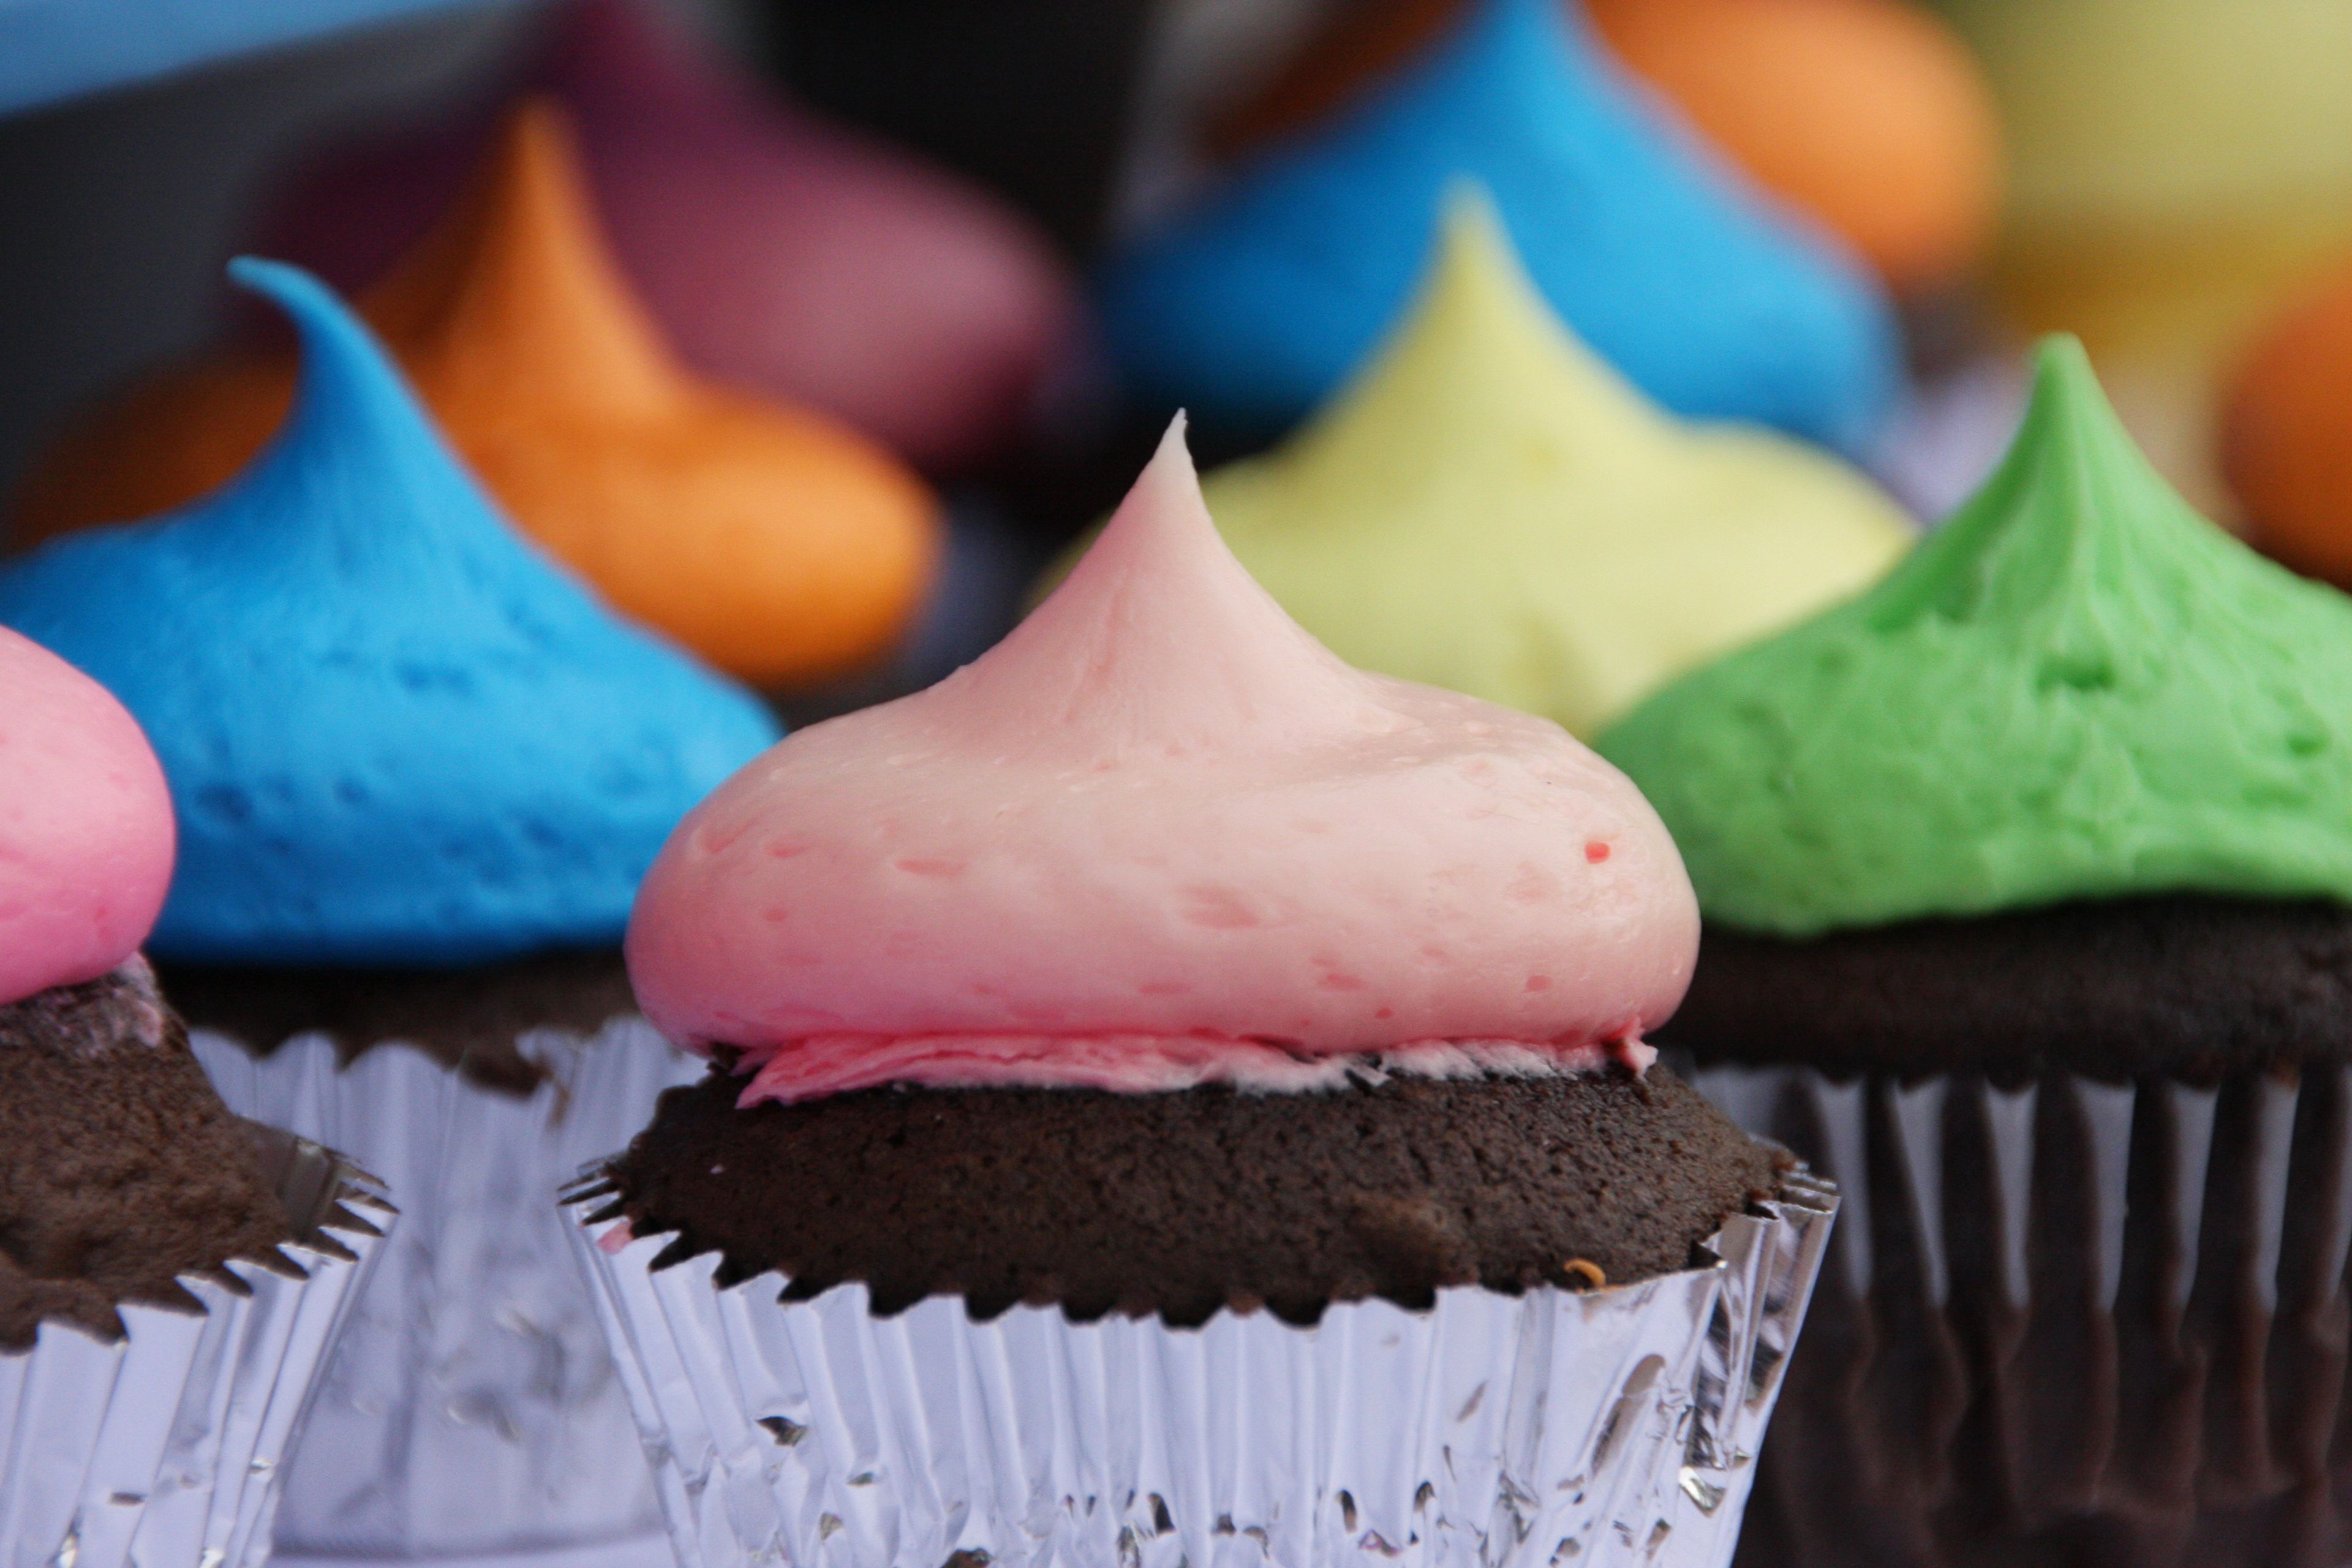 Chocolate cupcakes with colored frosting.